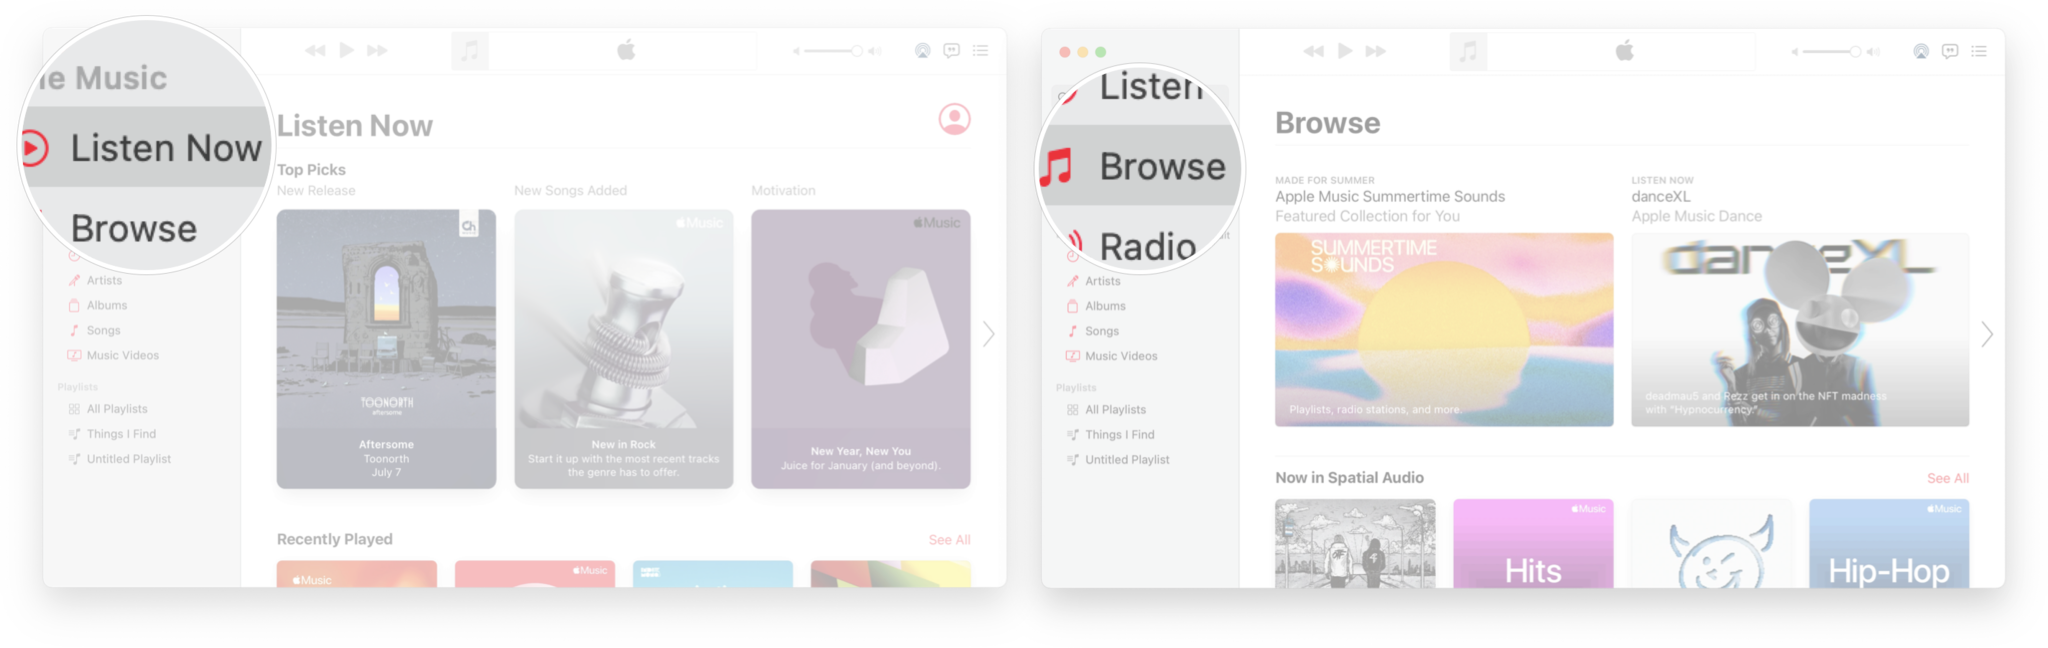 How To Navigate Music In macOS Big Sur: Launch Music, click For You, or click browse.